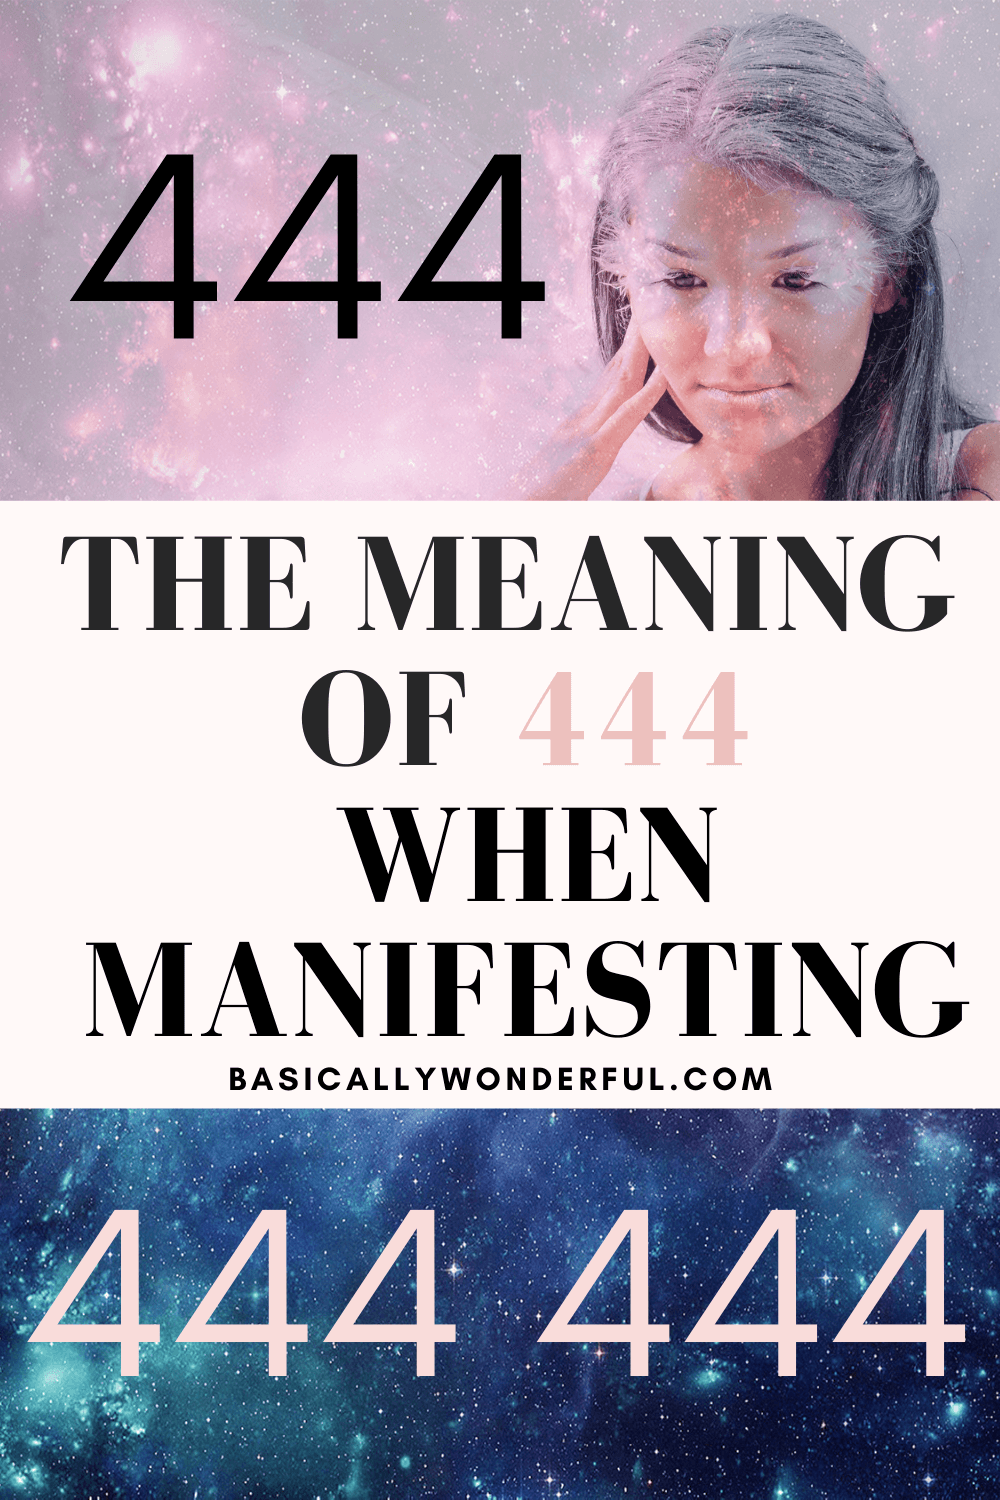 444 astrology meaning